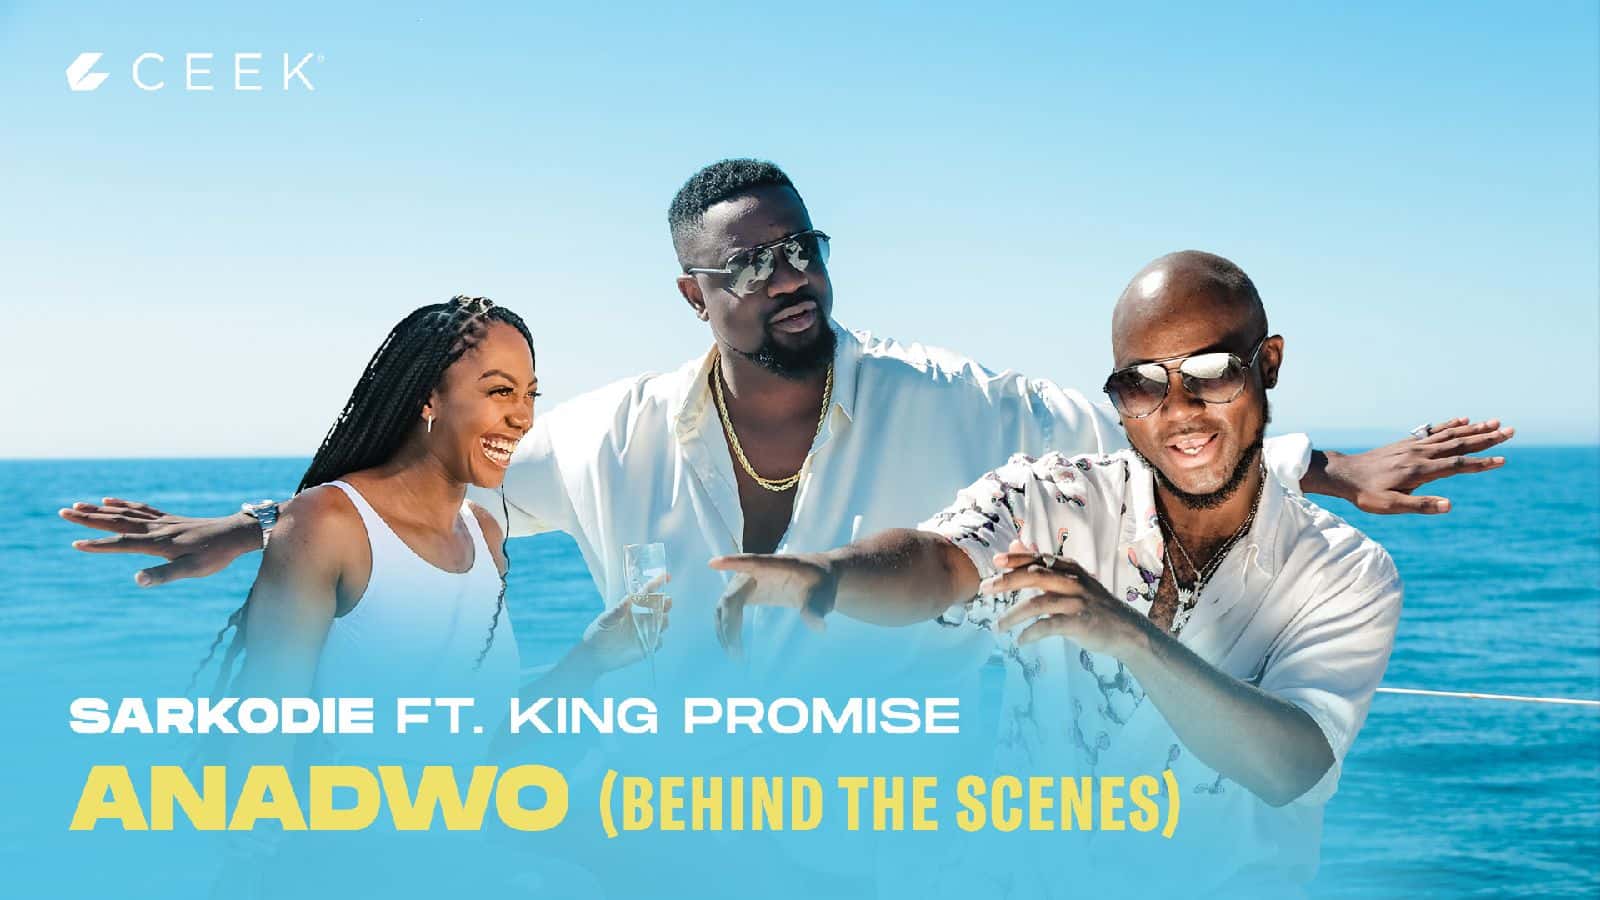 Anadwo featuring King Promise - Behind The Scenes ceek.com